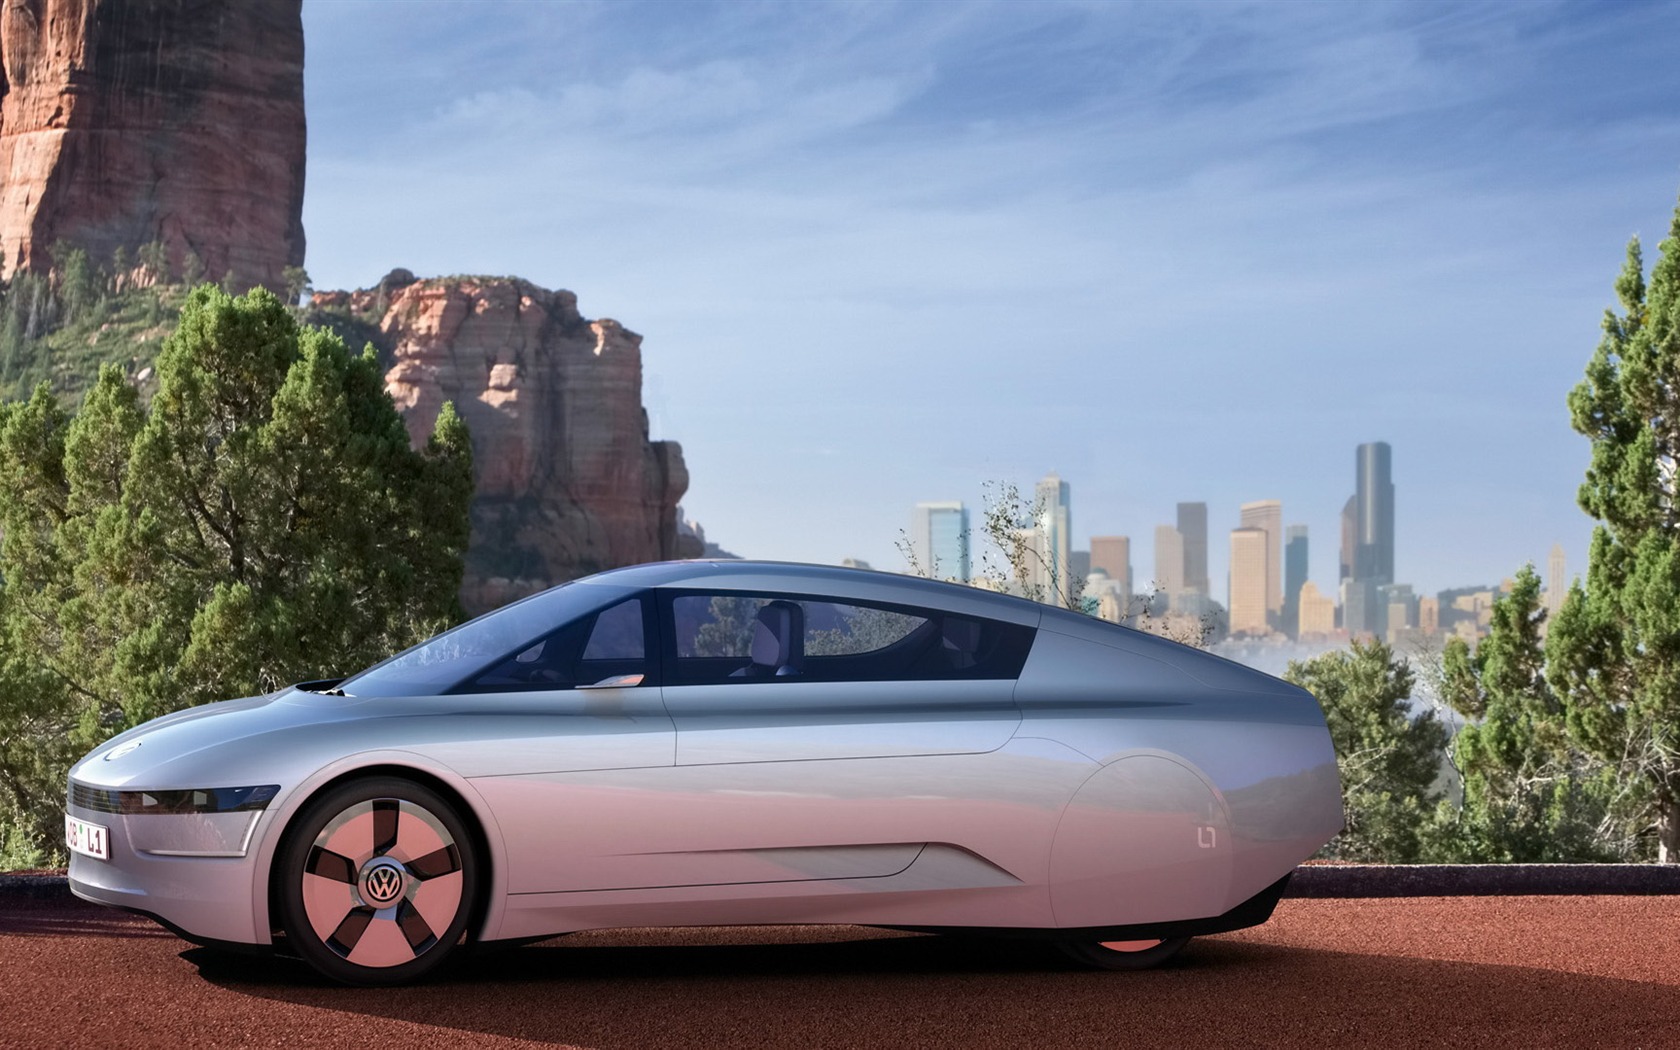 Volkswagen L1 Tapety Concept Car #16 - 1680x1050